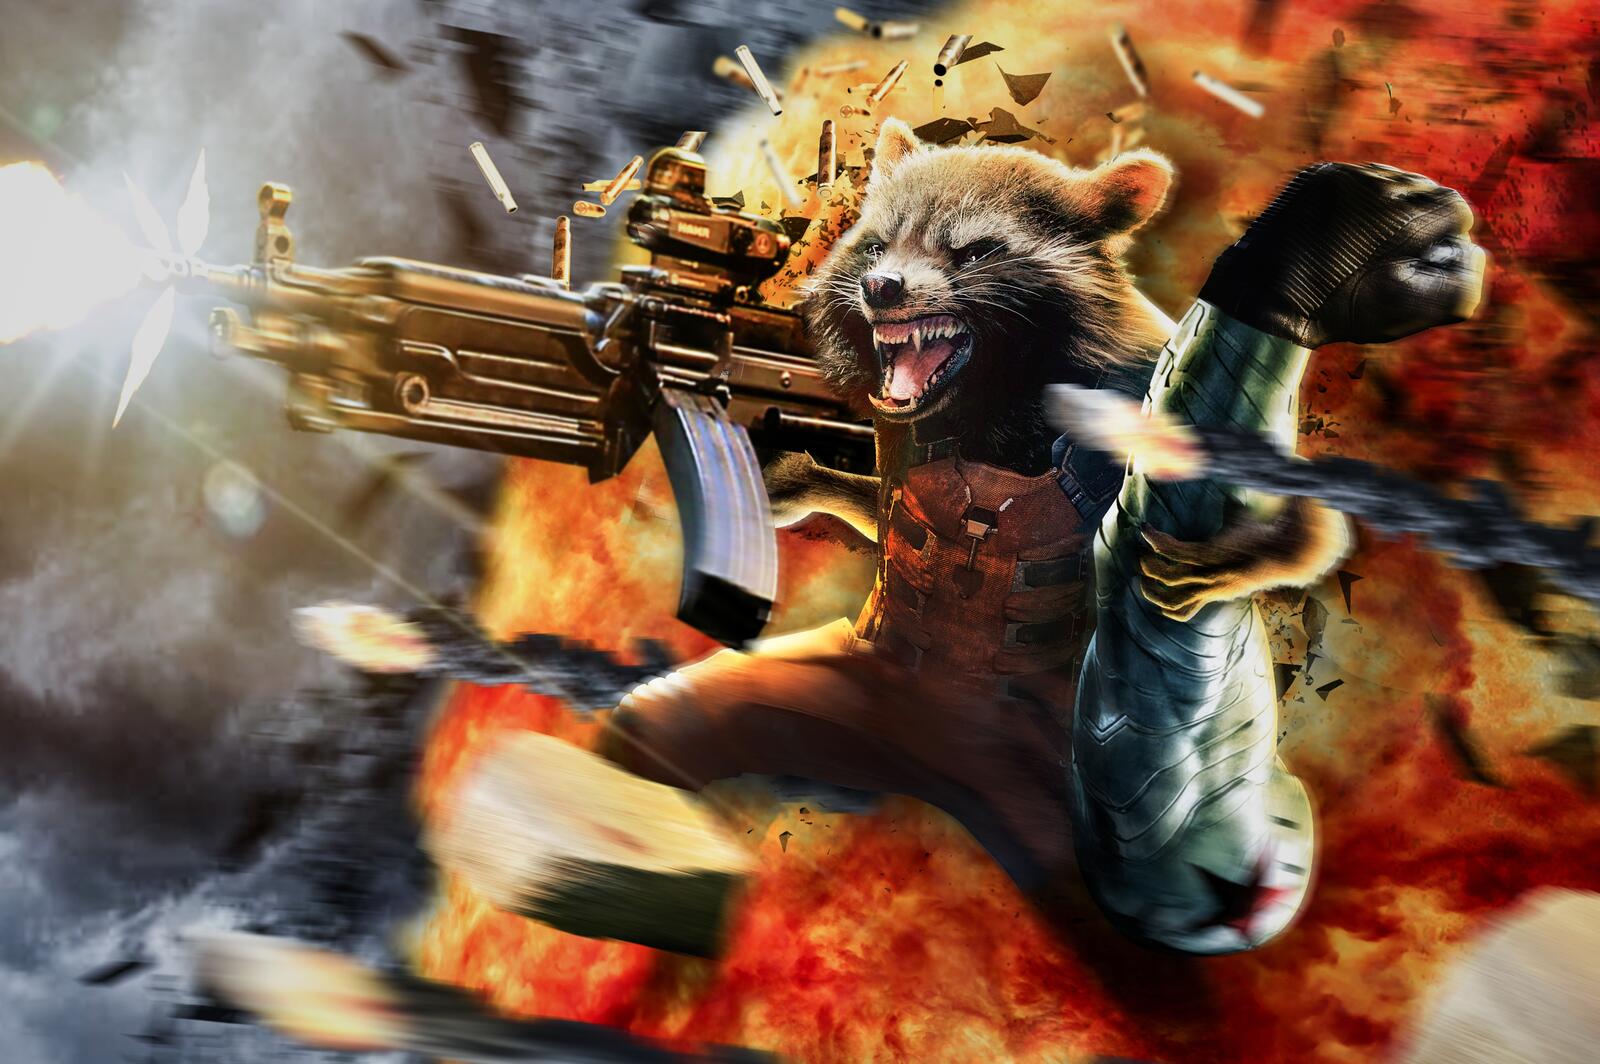 Free photo The raccoon with the machine gun from the Guardians of the Galaxy movie.